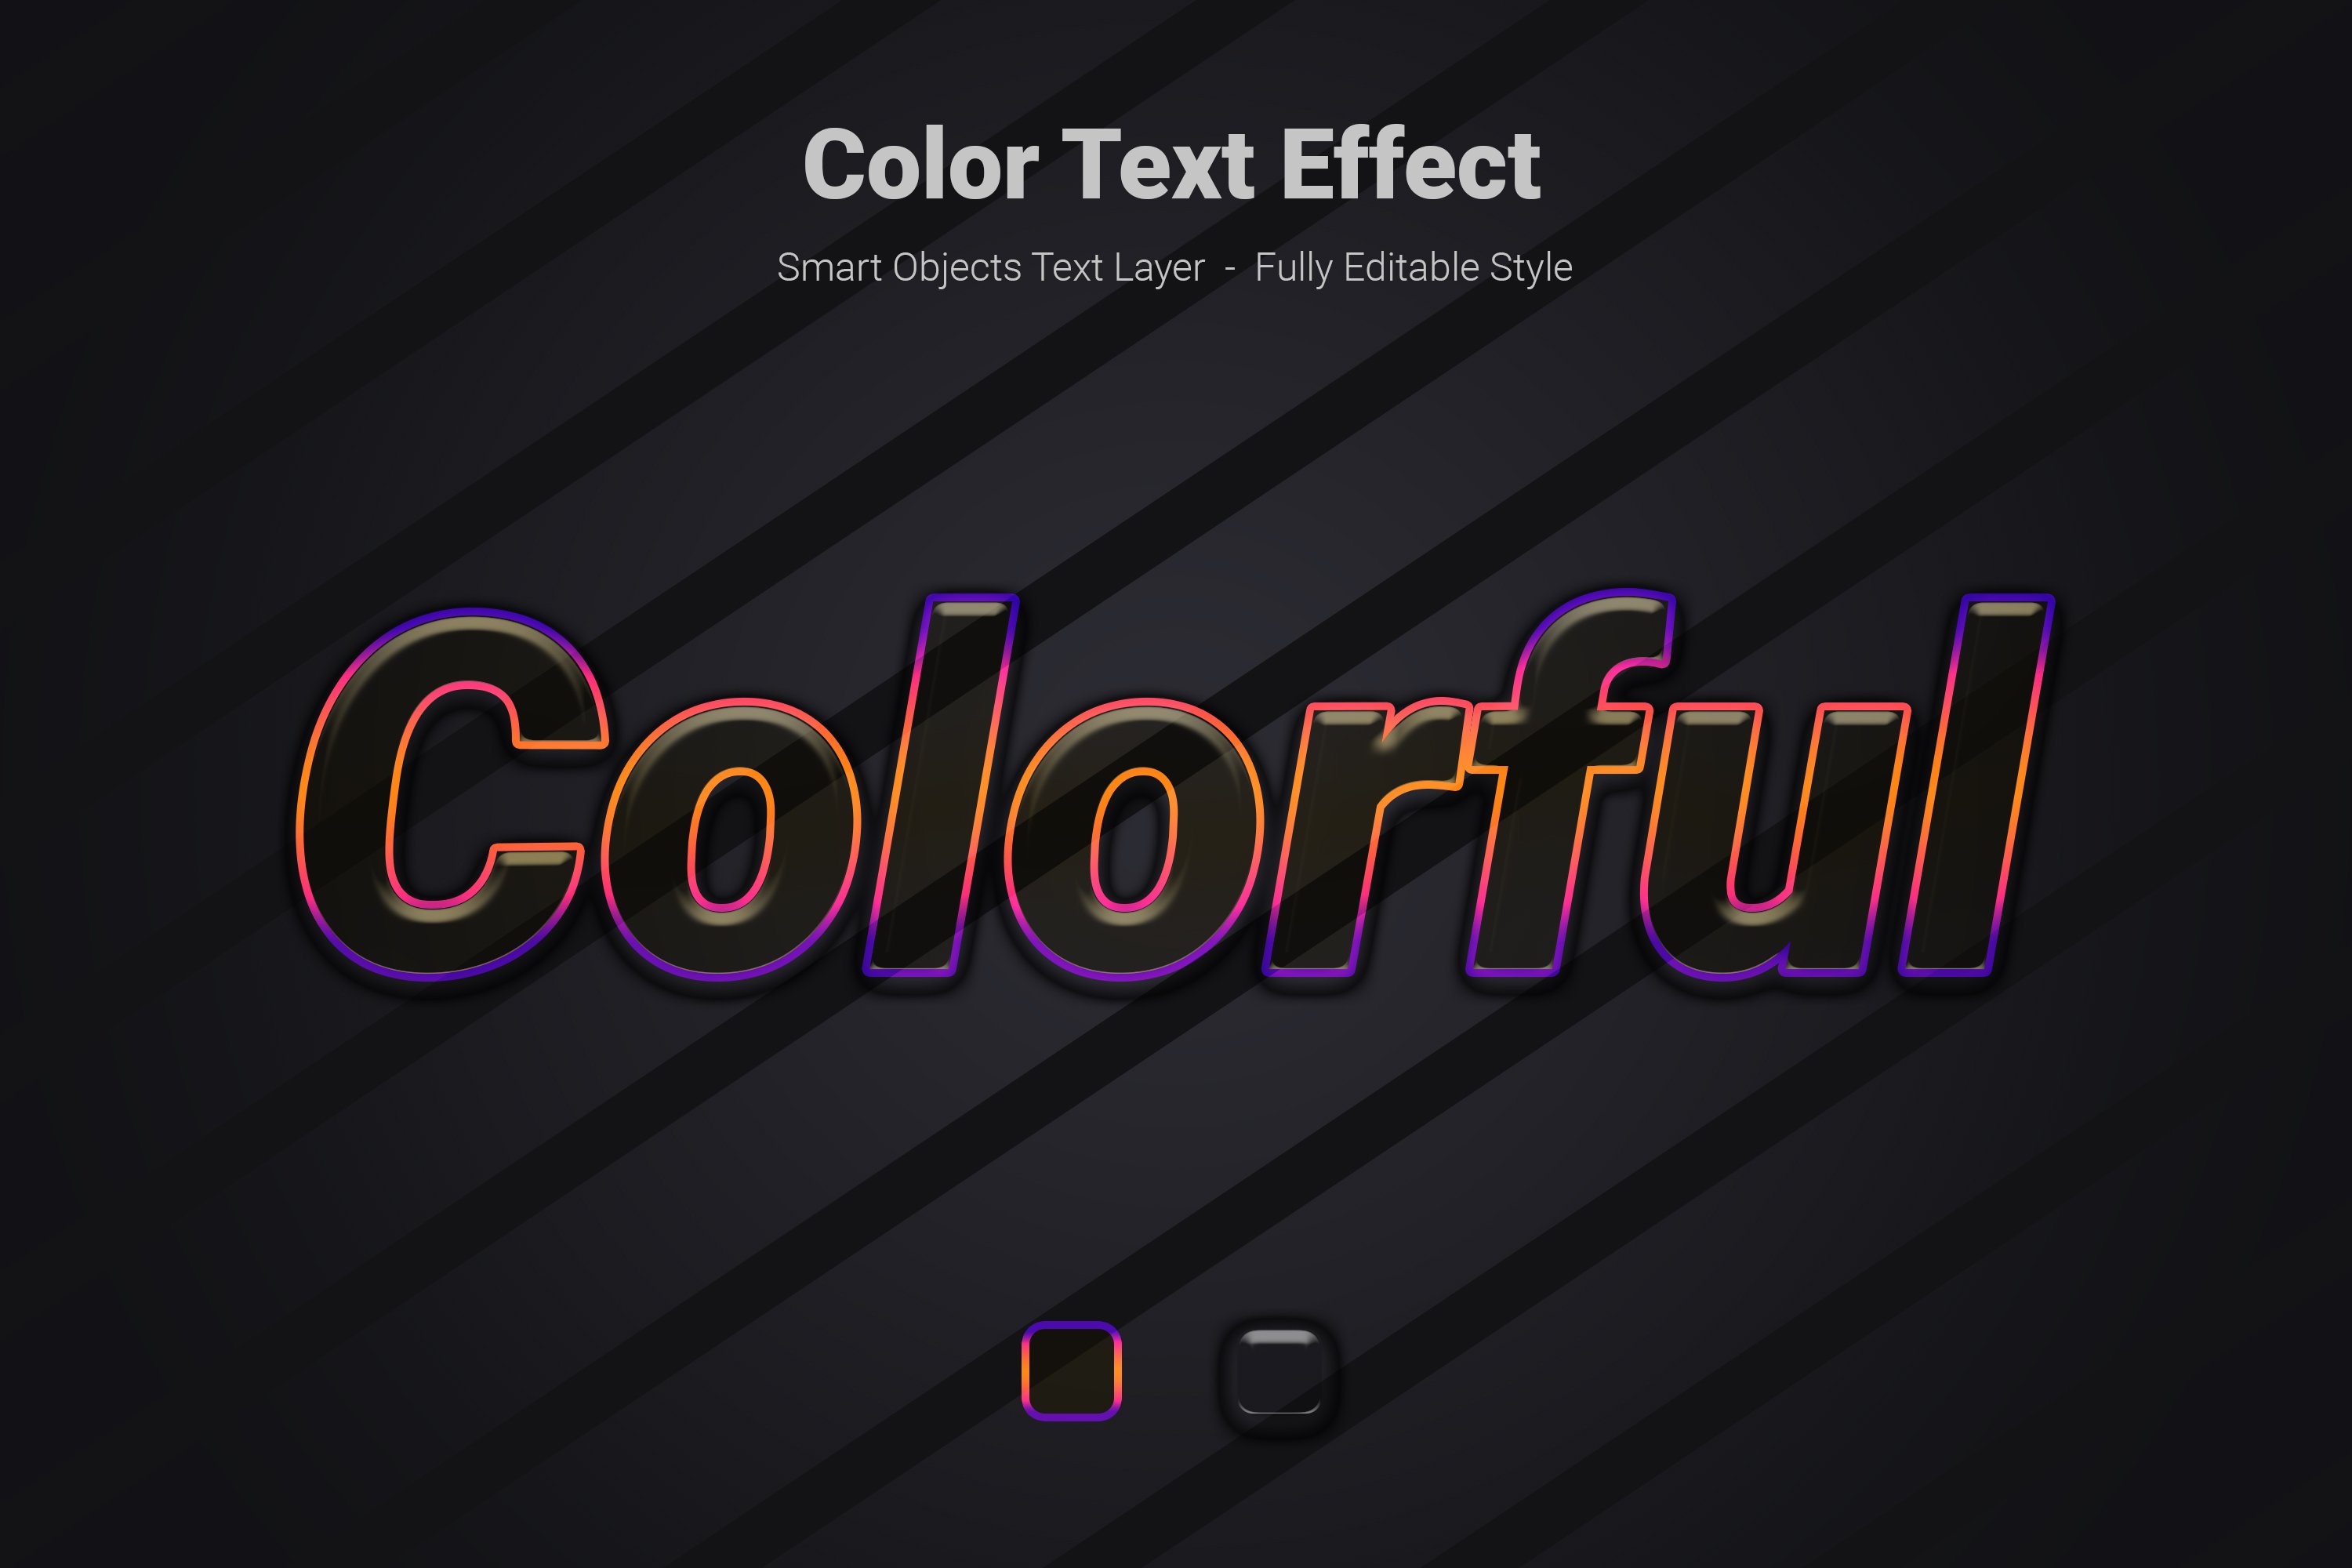 Colorful Psd Text Style Effectcover image.